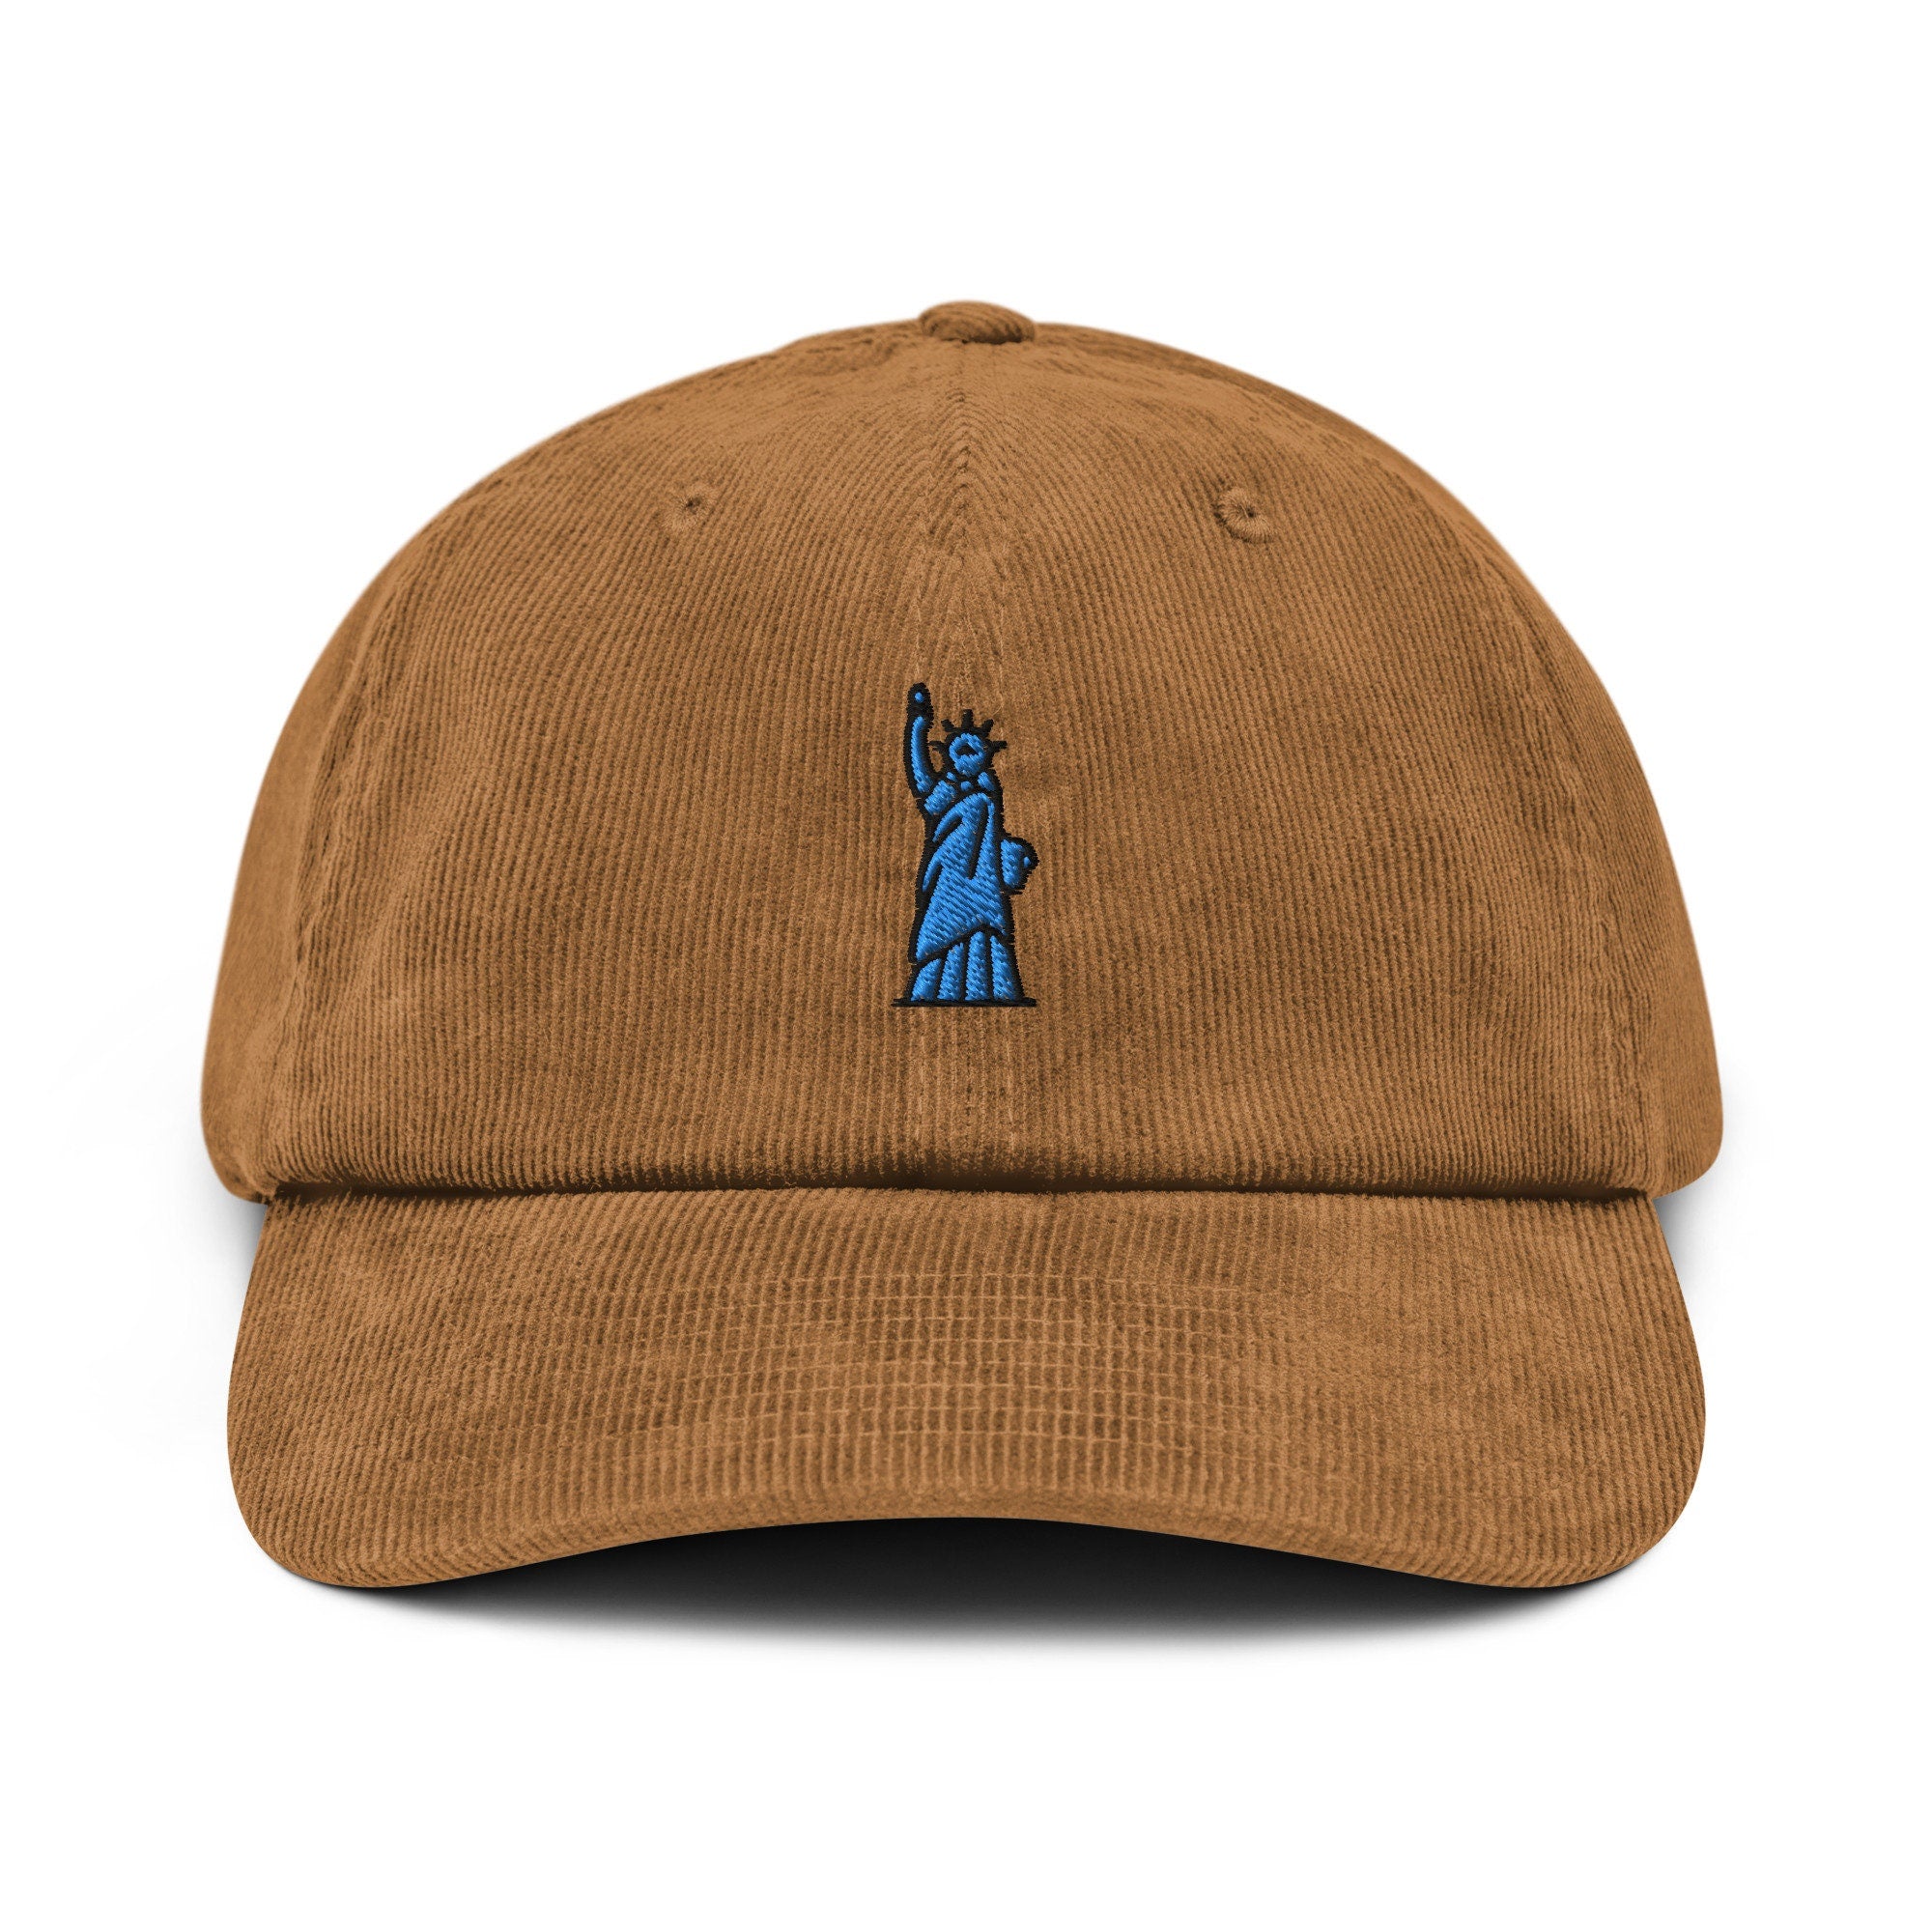 Statue of Liberty Corduroy Hat, Handmade Embroidered Corduroy Dad Cap - Multiple Colors